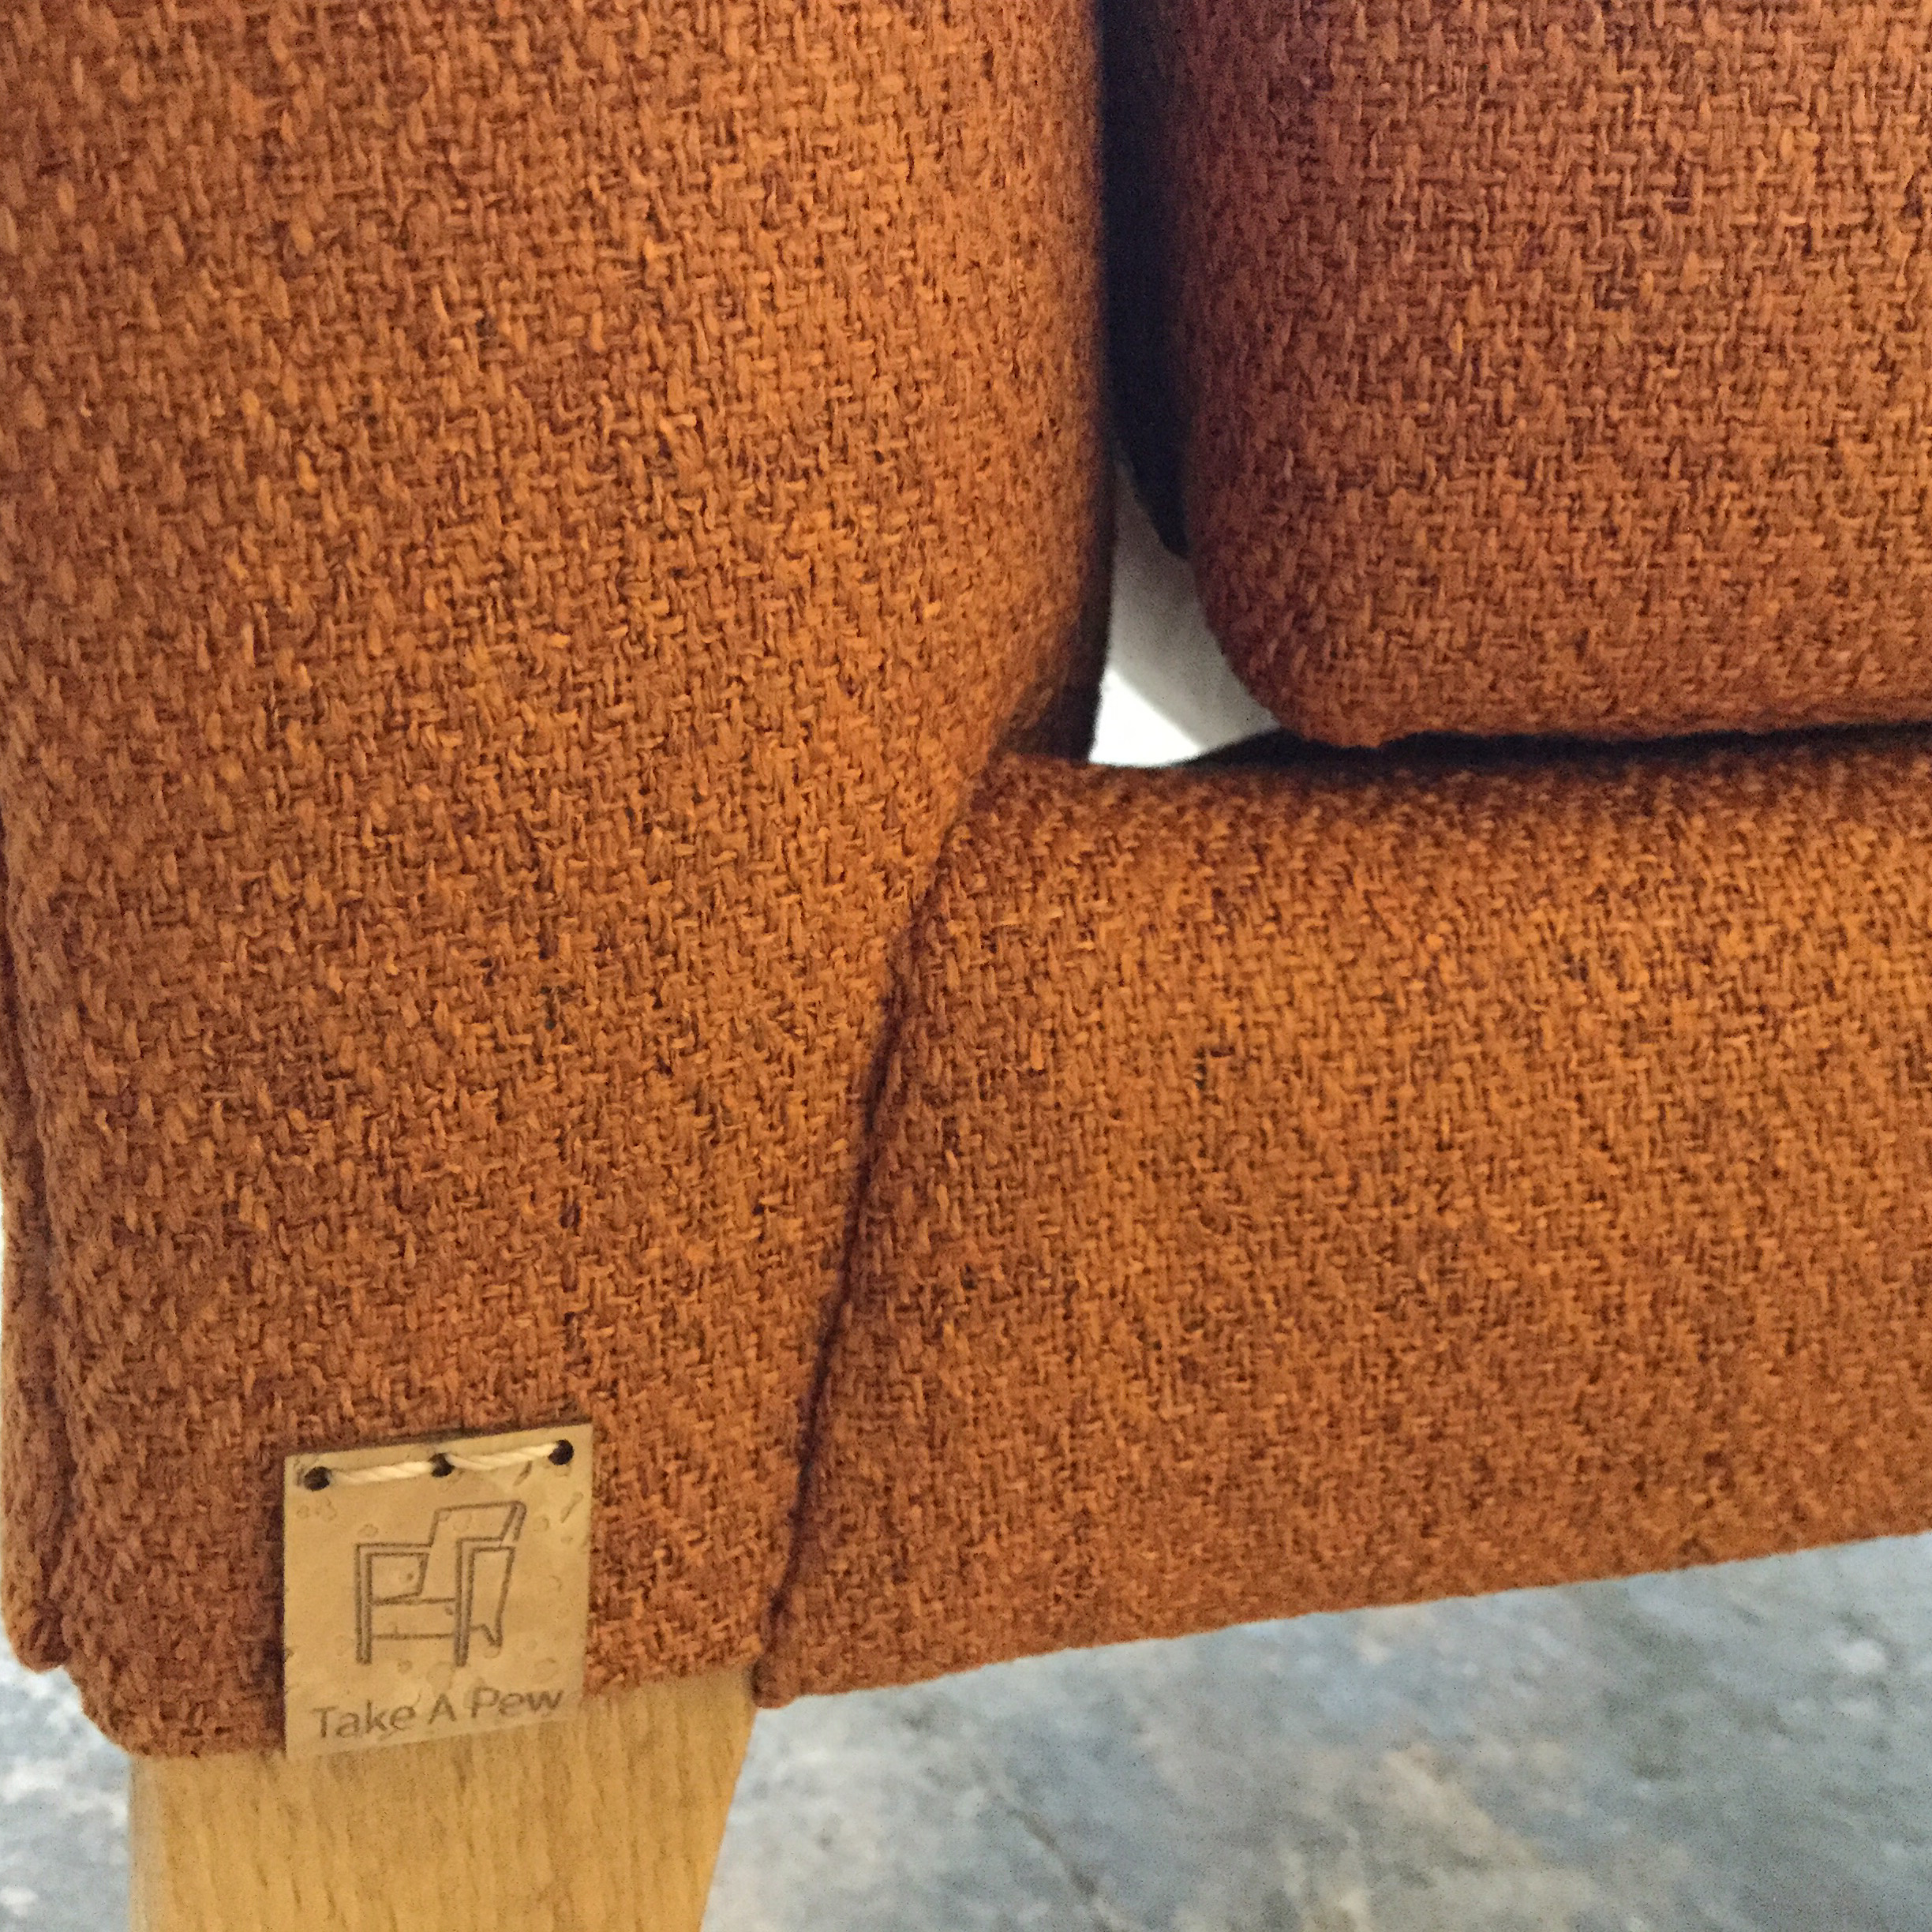 Ercol Mid Century Wingback Chair